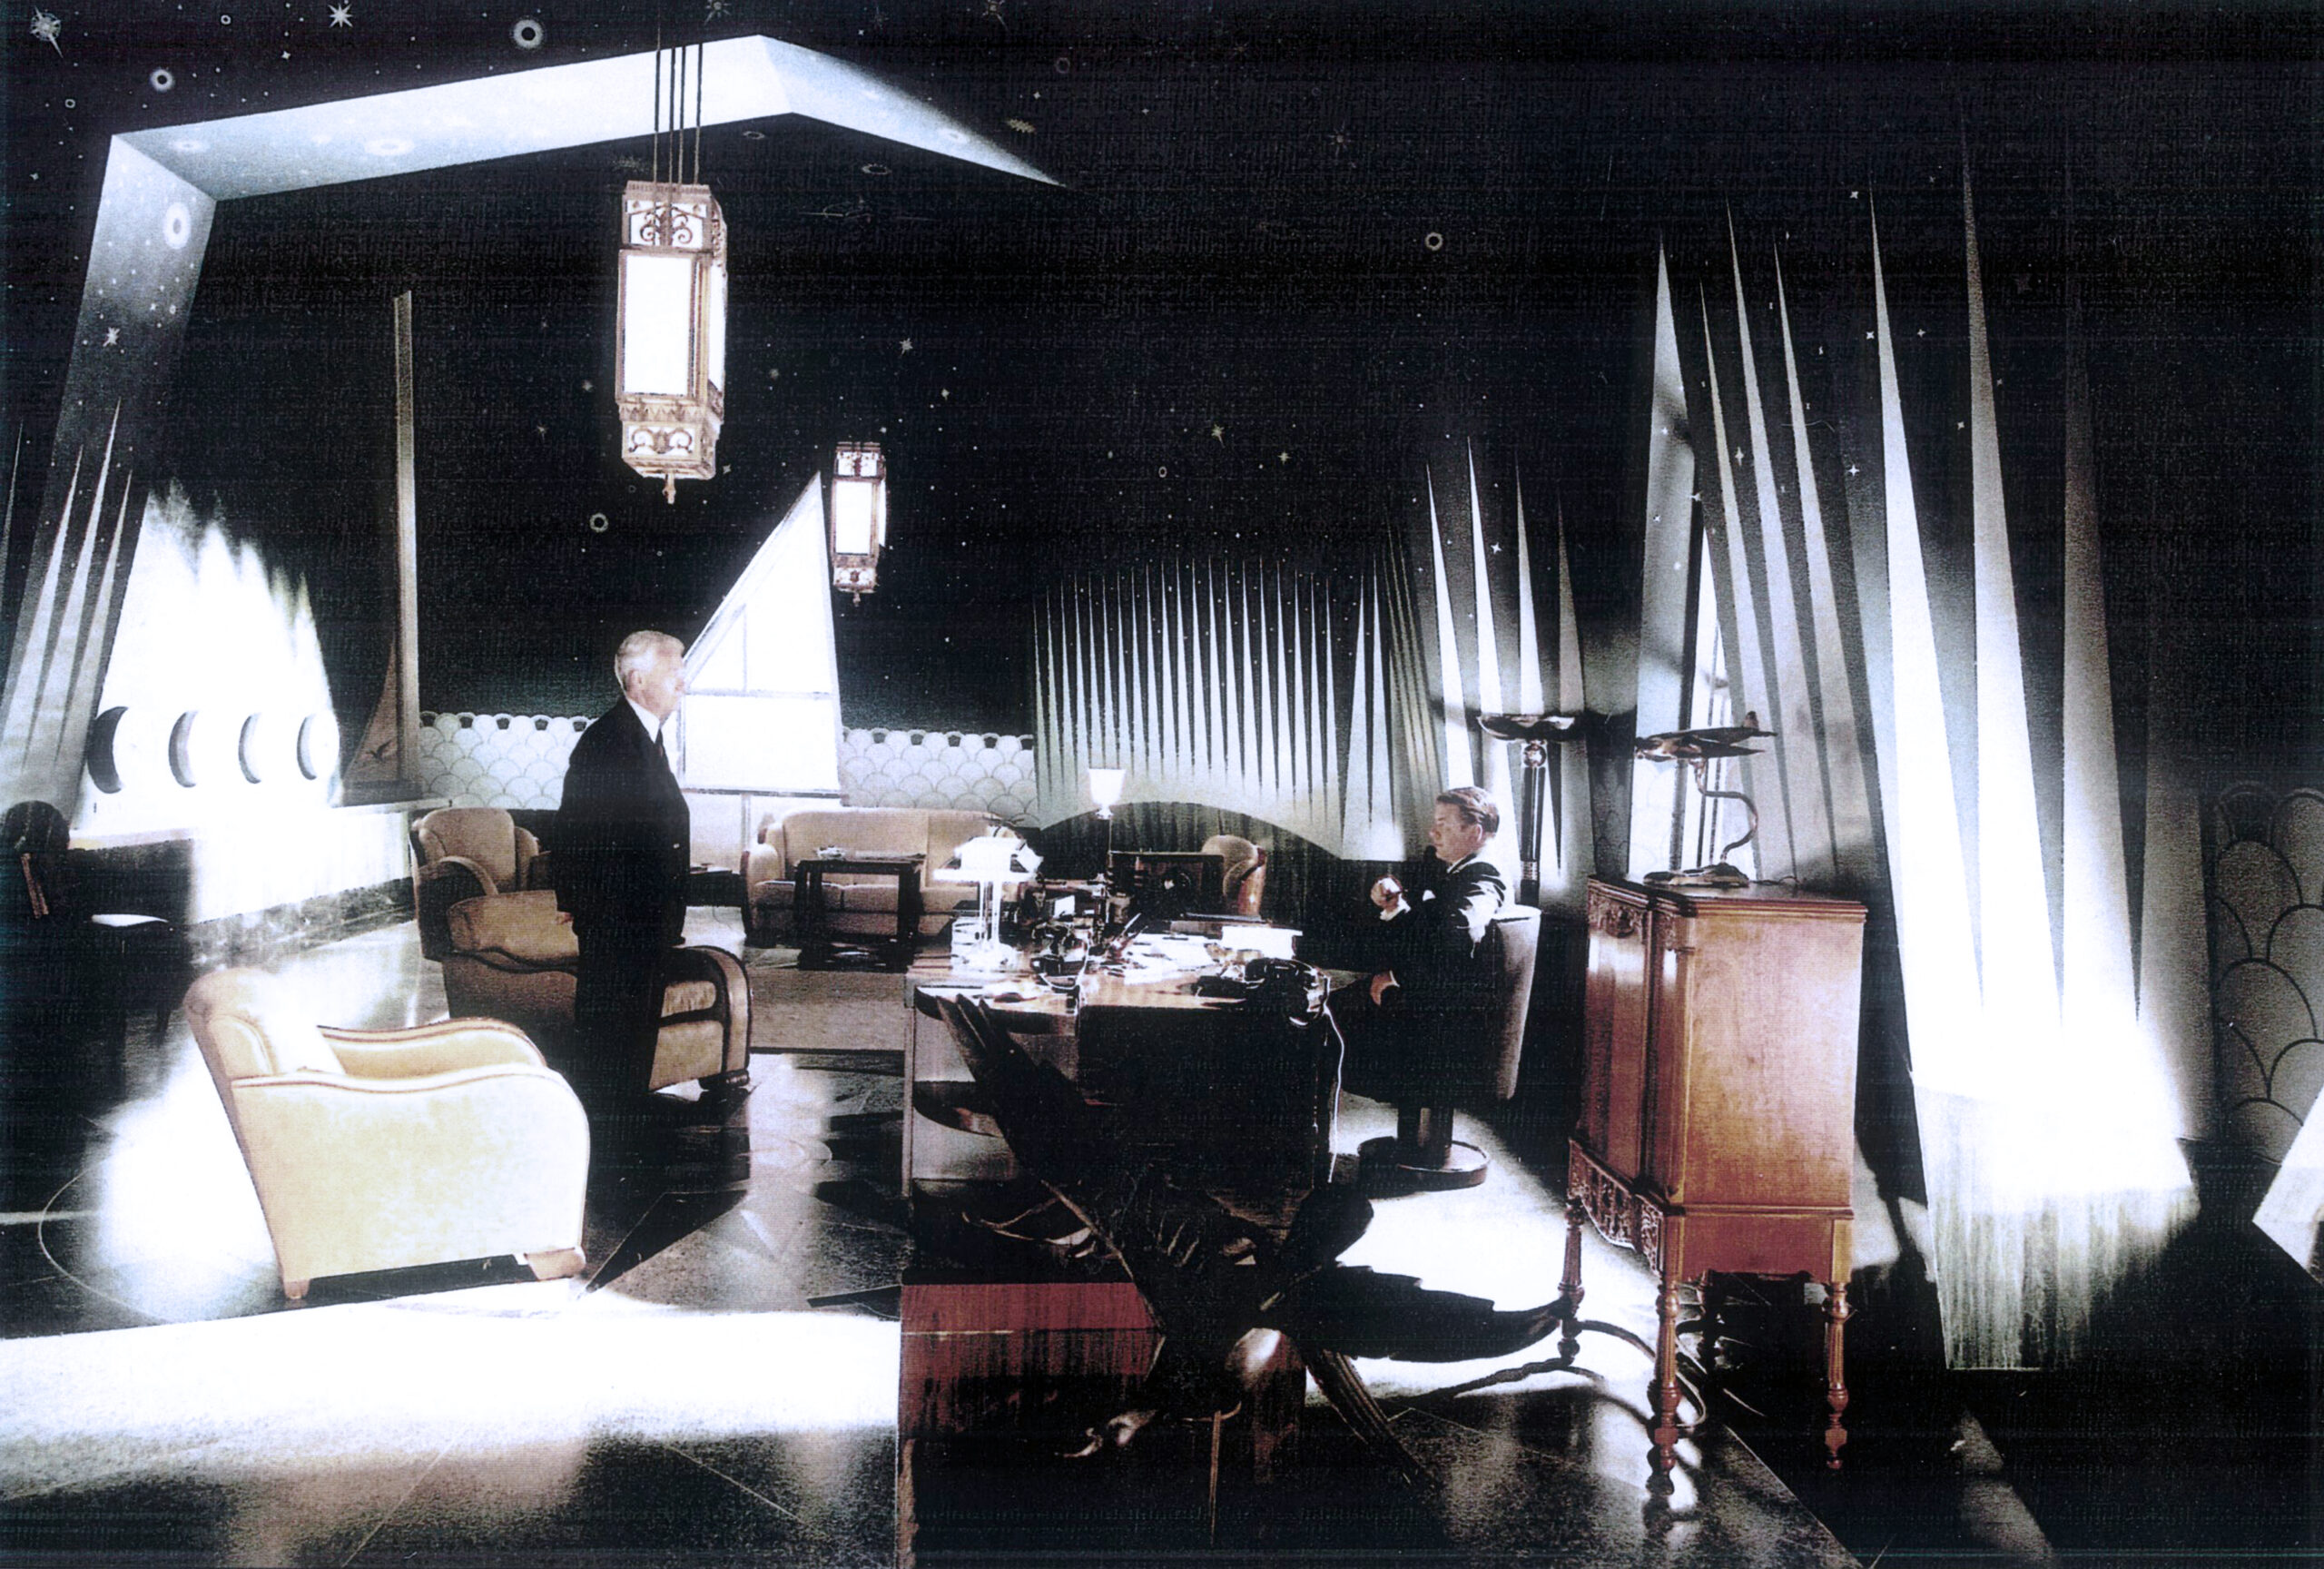 THE AVIATOR - Directed by Martin Scorsese - Int. Chrysler Building Office, Stage Set - ©2004 - Miramax Films